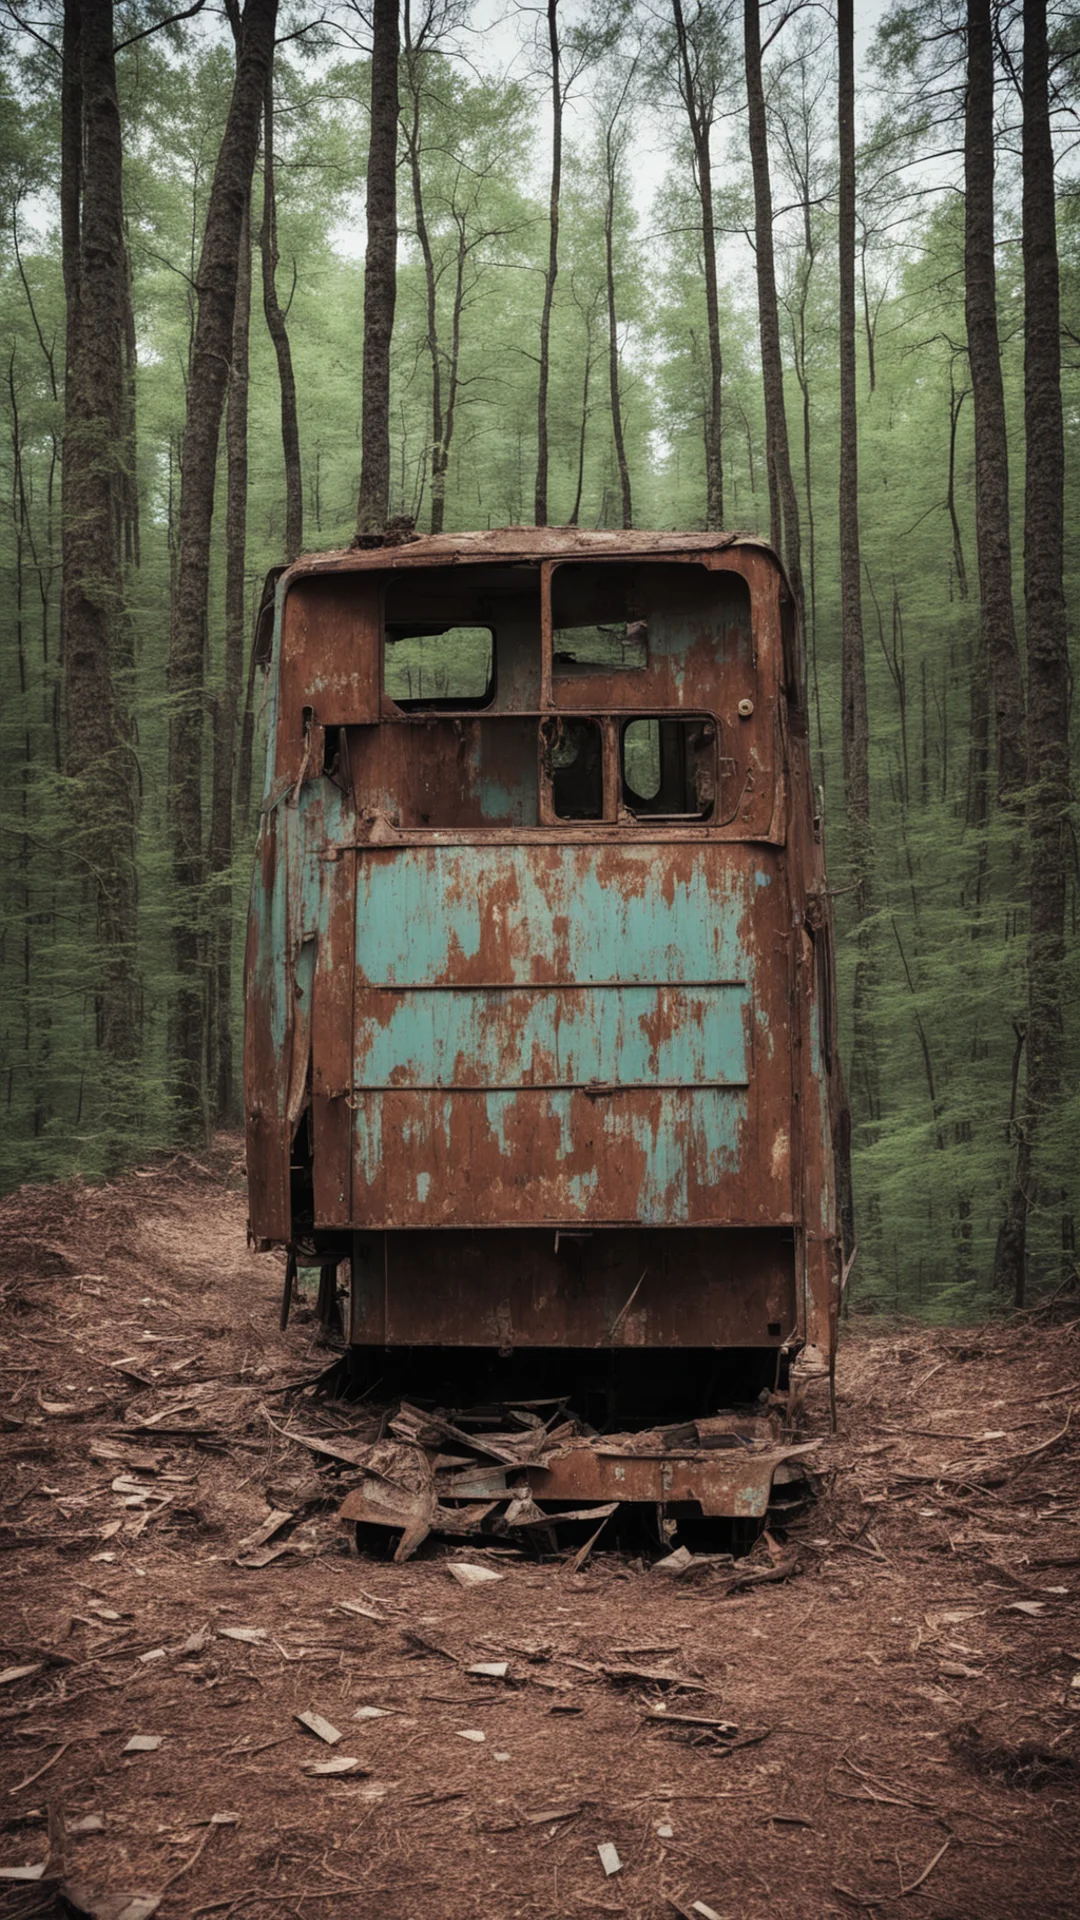 close up shot of abandoned 80s trailer van in the woods junk rusty corroded vintage wide angle day time atmospheric wint good looking trending fantastic 1 tall